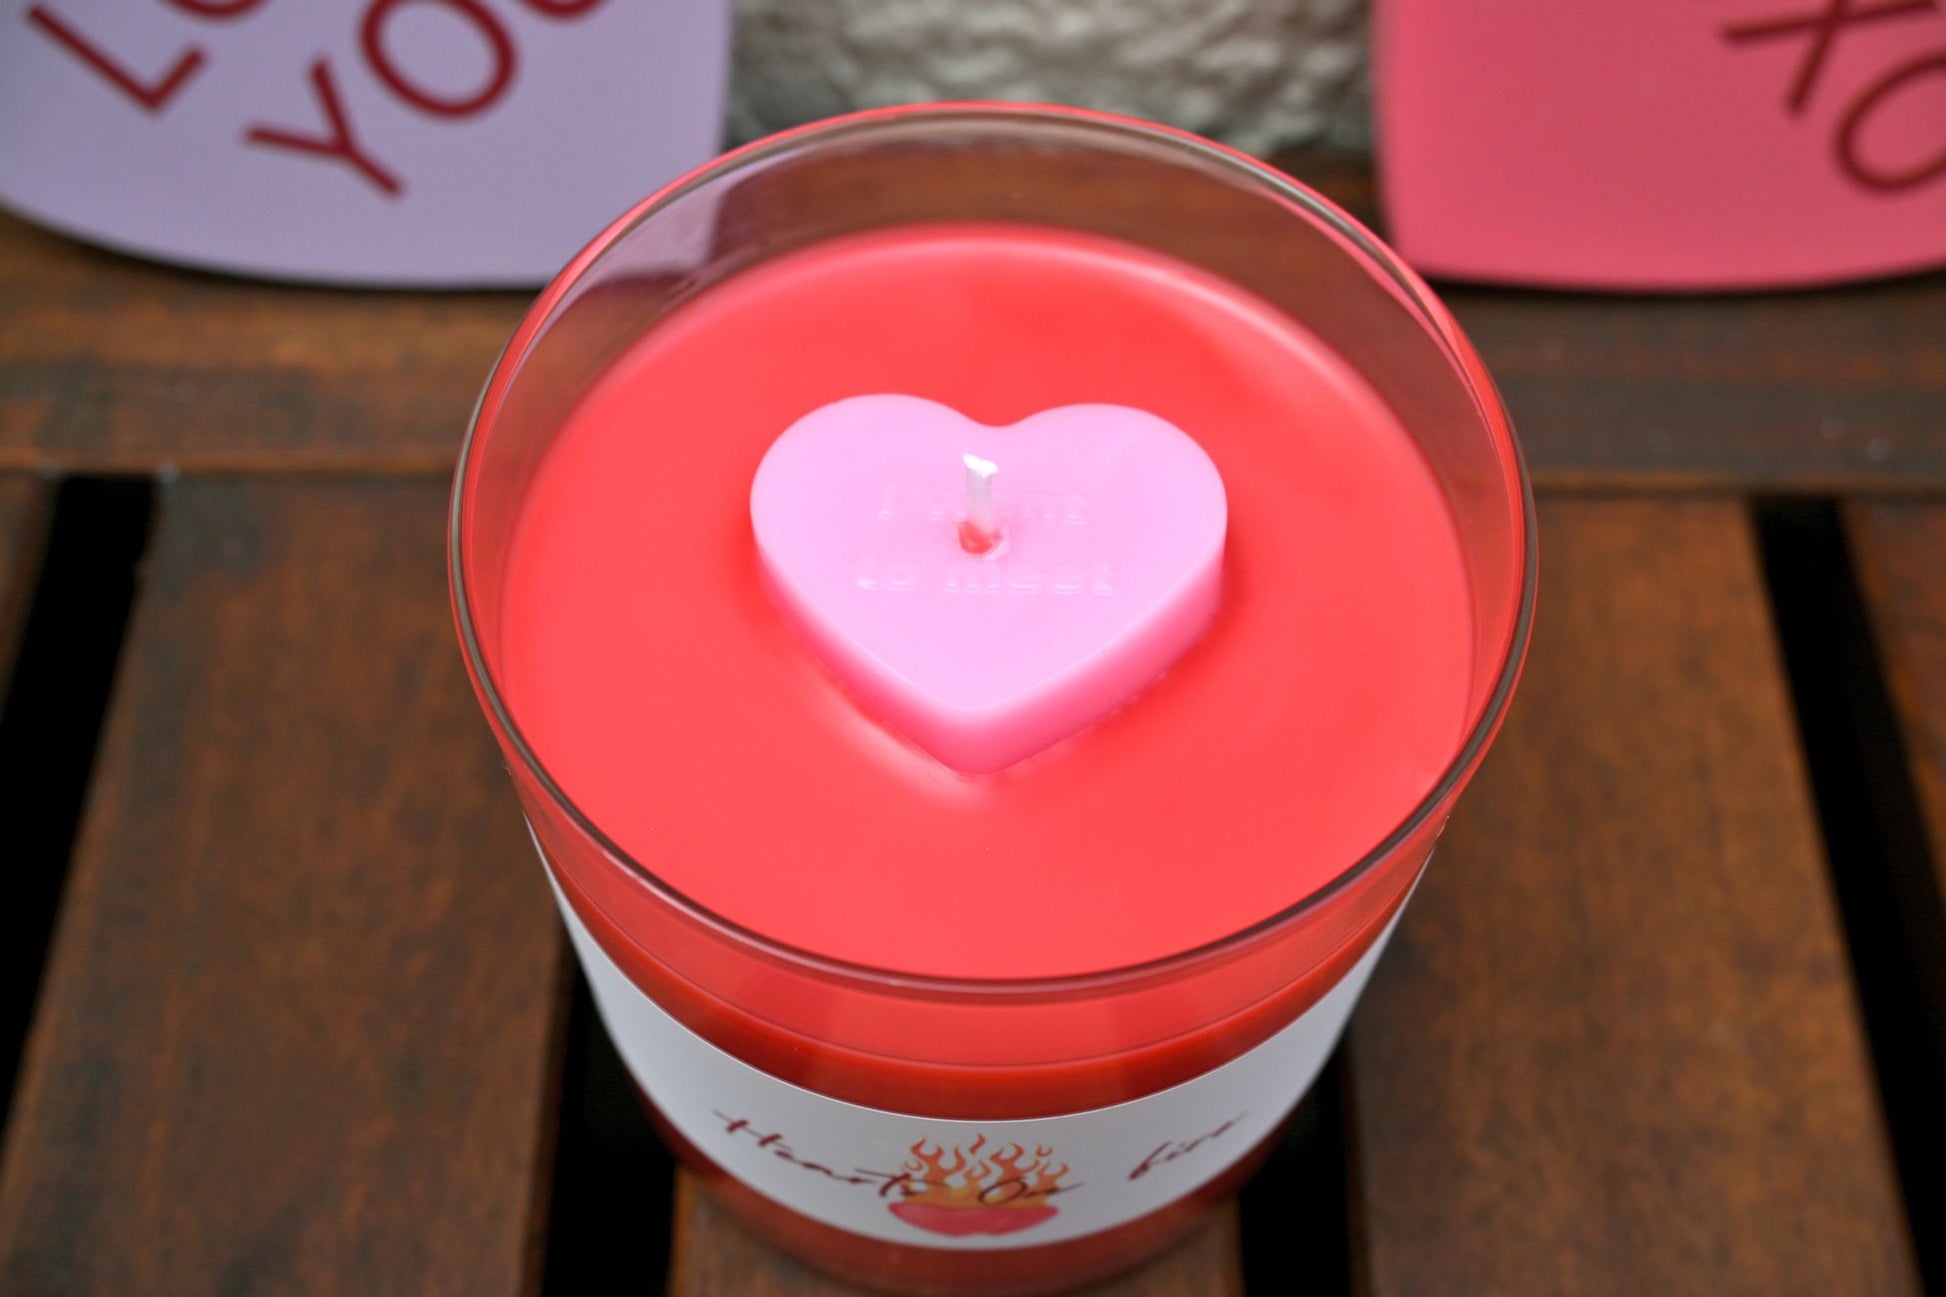 Hearts On Fire Candle - Red Hot Cinnamon Candle - Love Candle